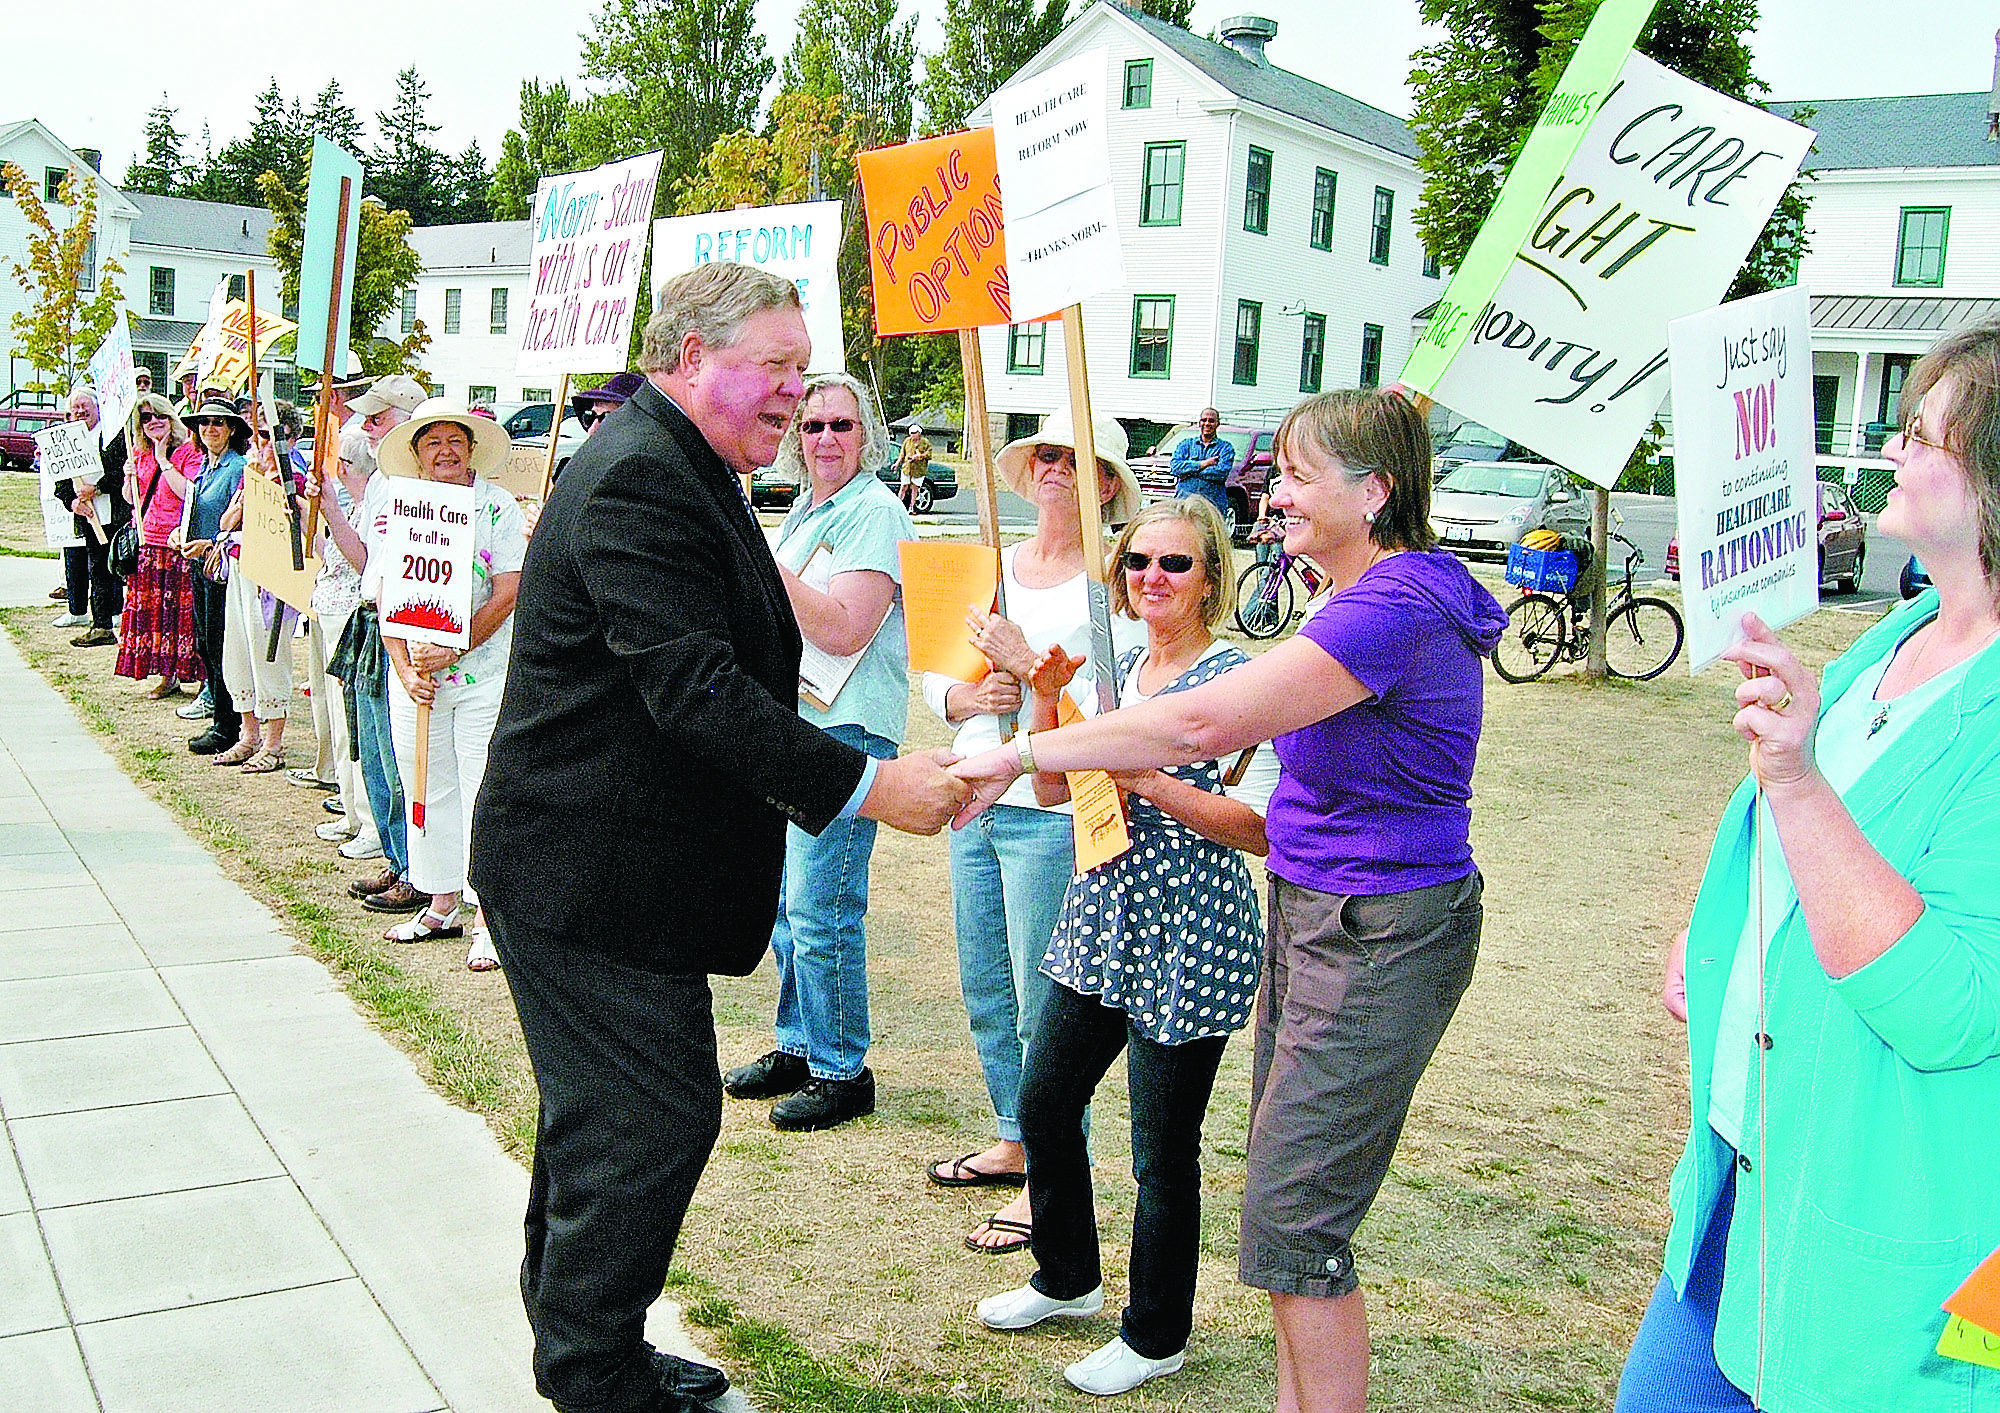 Rep. Norm Dicks is welcomed by a line of supporters of health care reform and related issues at Fort Worden State Park in Port Townsend in August 2009. The veteran congressman arrived to address the then-Port Townsend Chamber of Commerce.  -- Photo by Jeff Chew/Peninsula Daily News